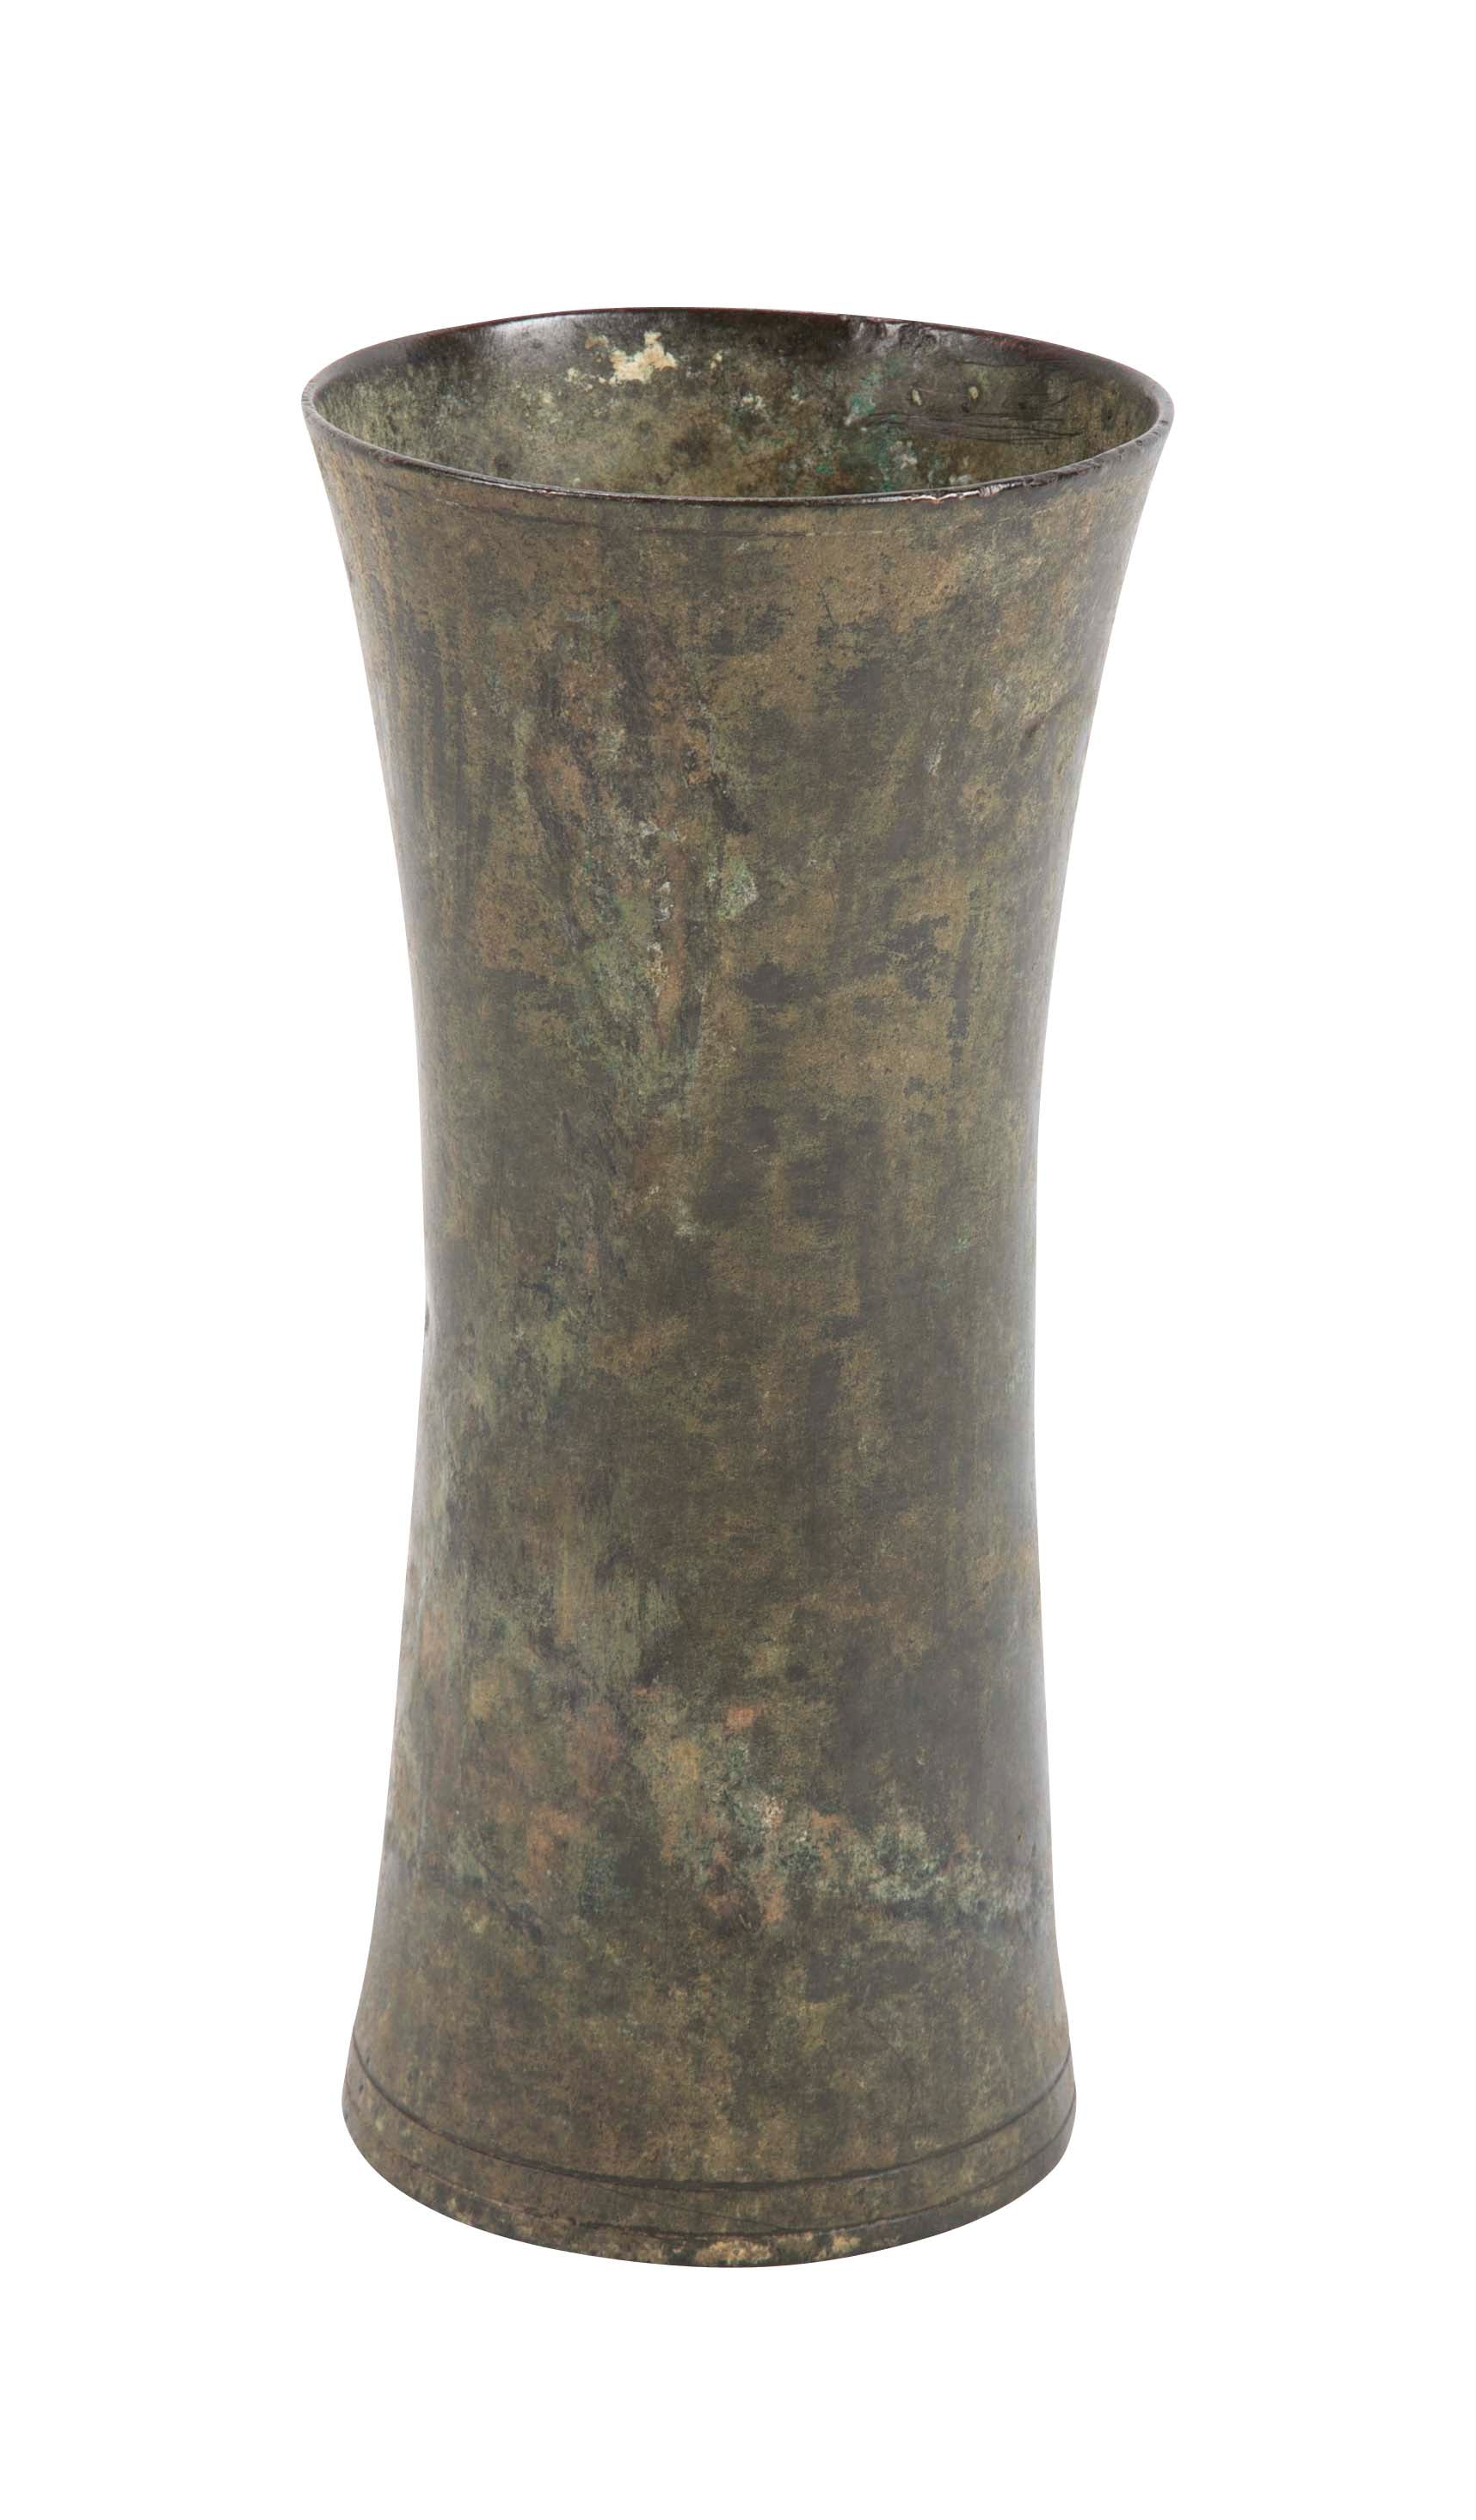 Bactrian Bronze Vessel with Simple Engraved Banding